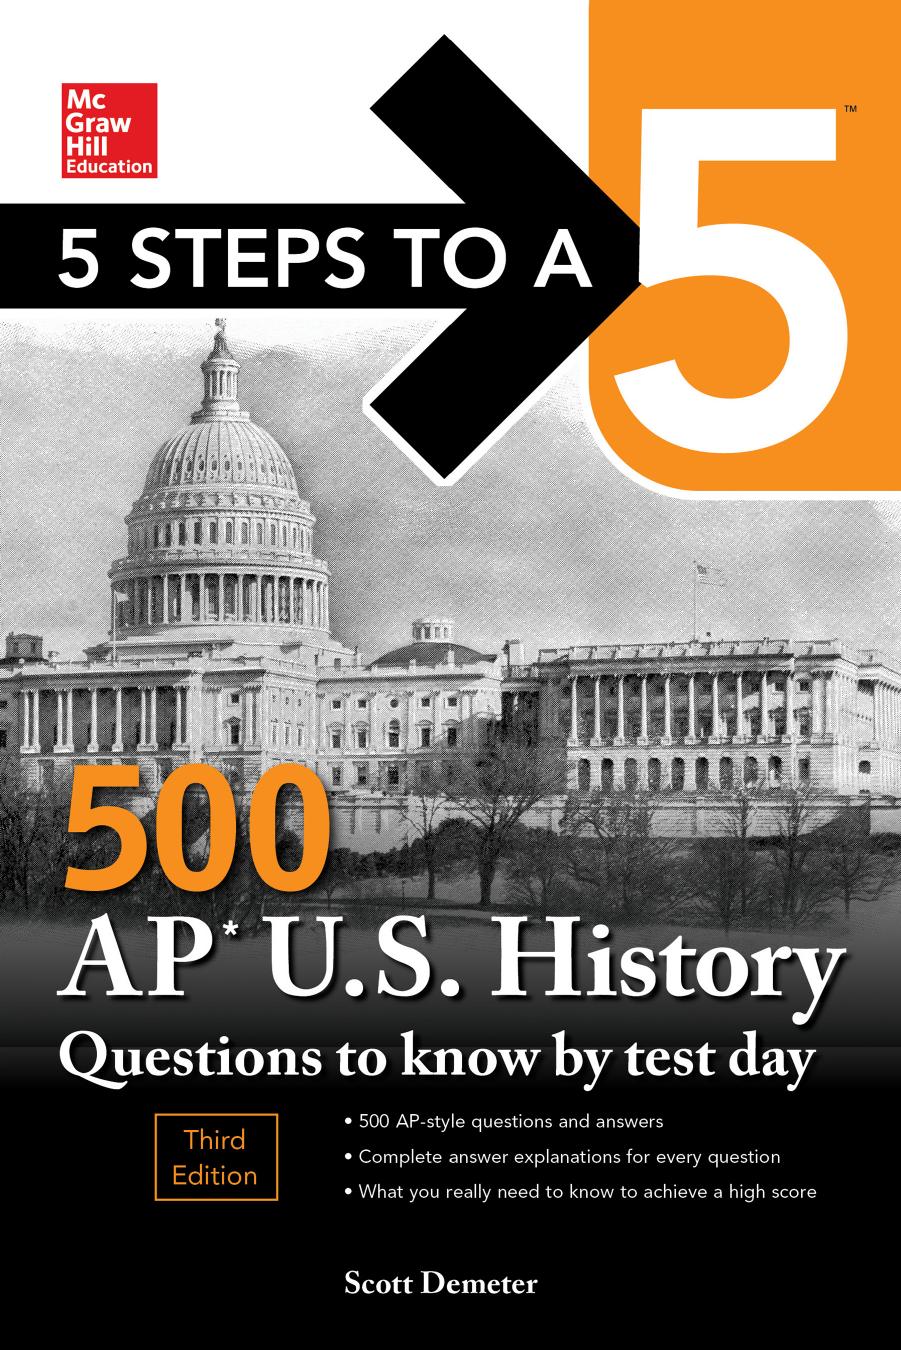 5 Steps to a 5 500 AP US History Questions to Know by Test Day 3rd Edition.1260441954.jpg